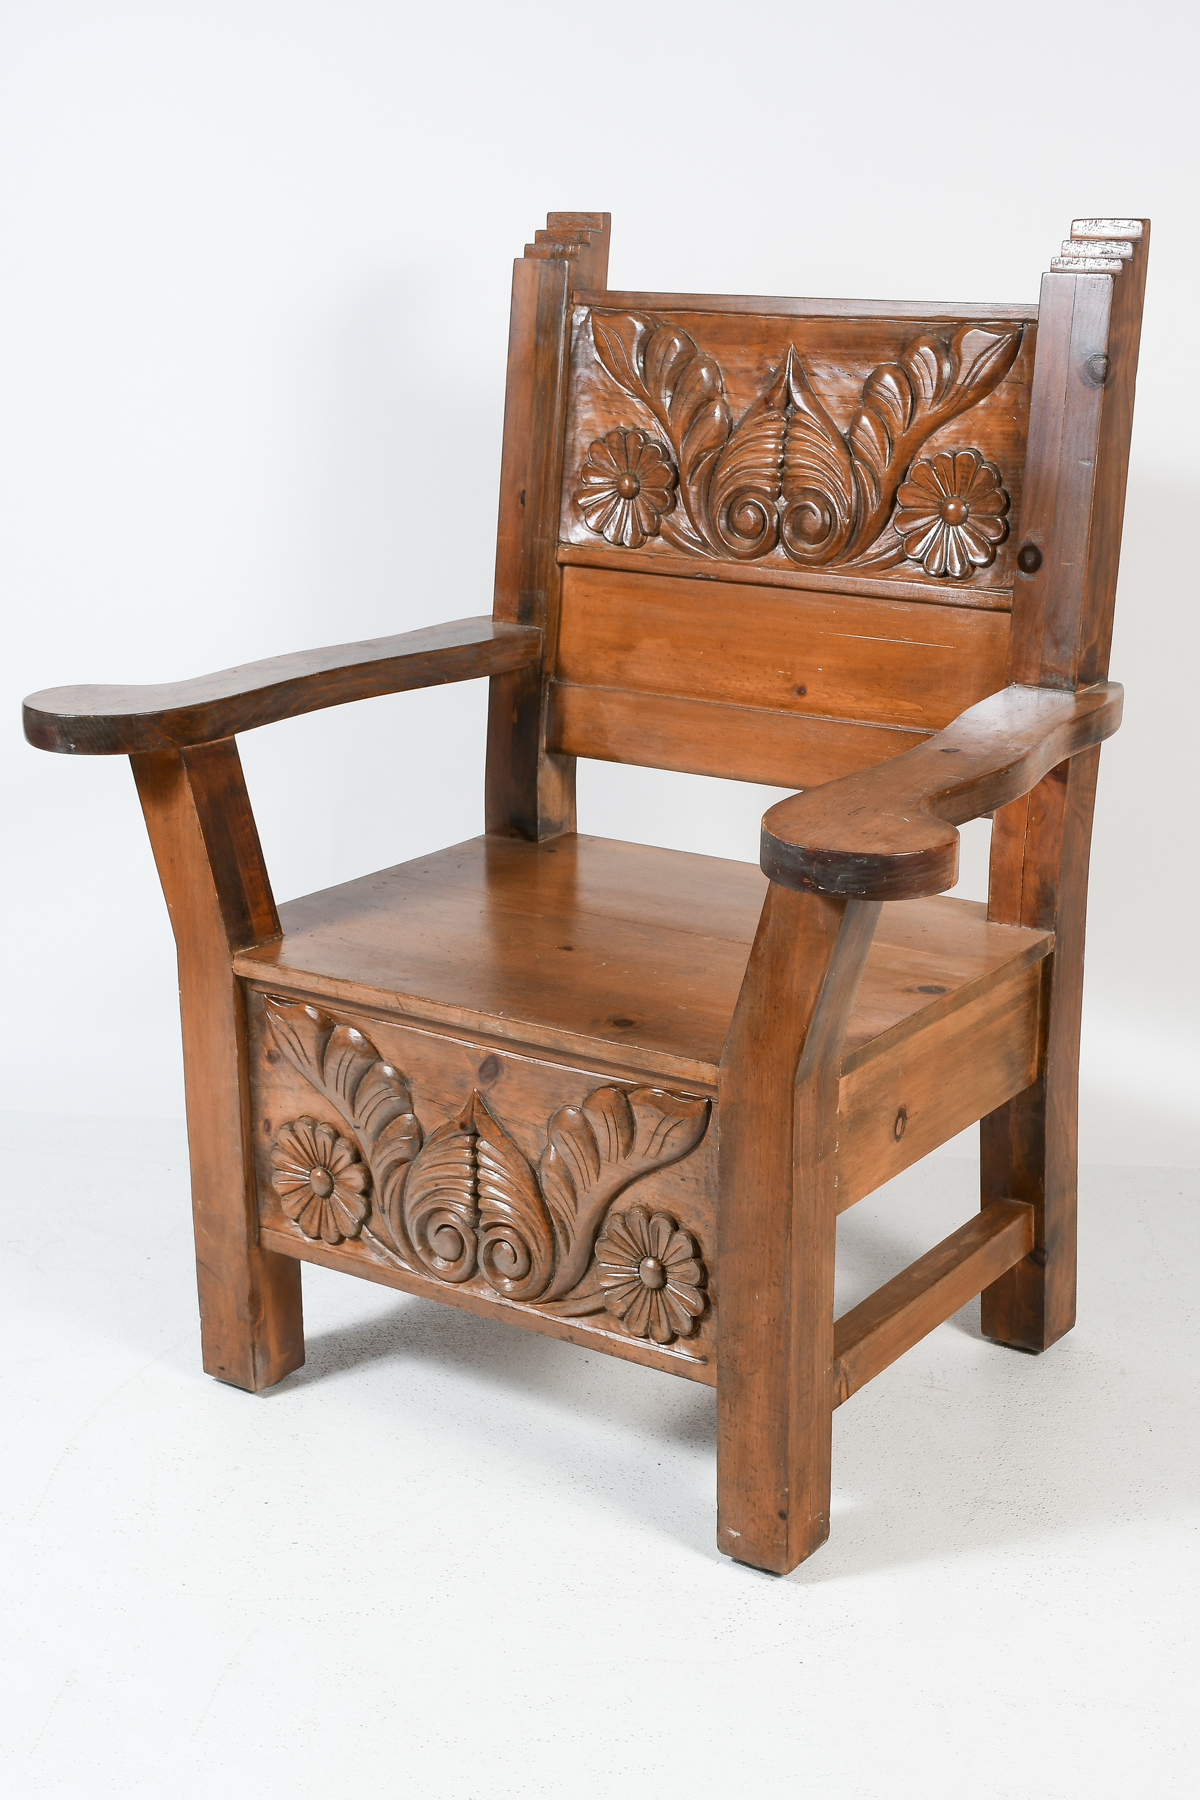 CARVED MEXICAN PINE CHAIR Solid 2ece82